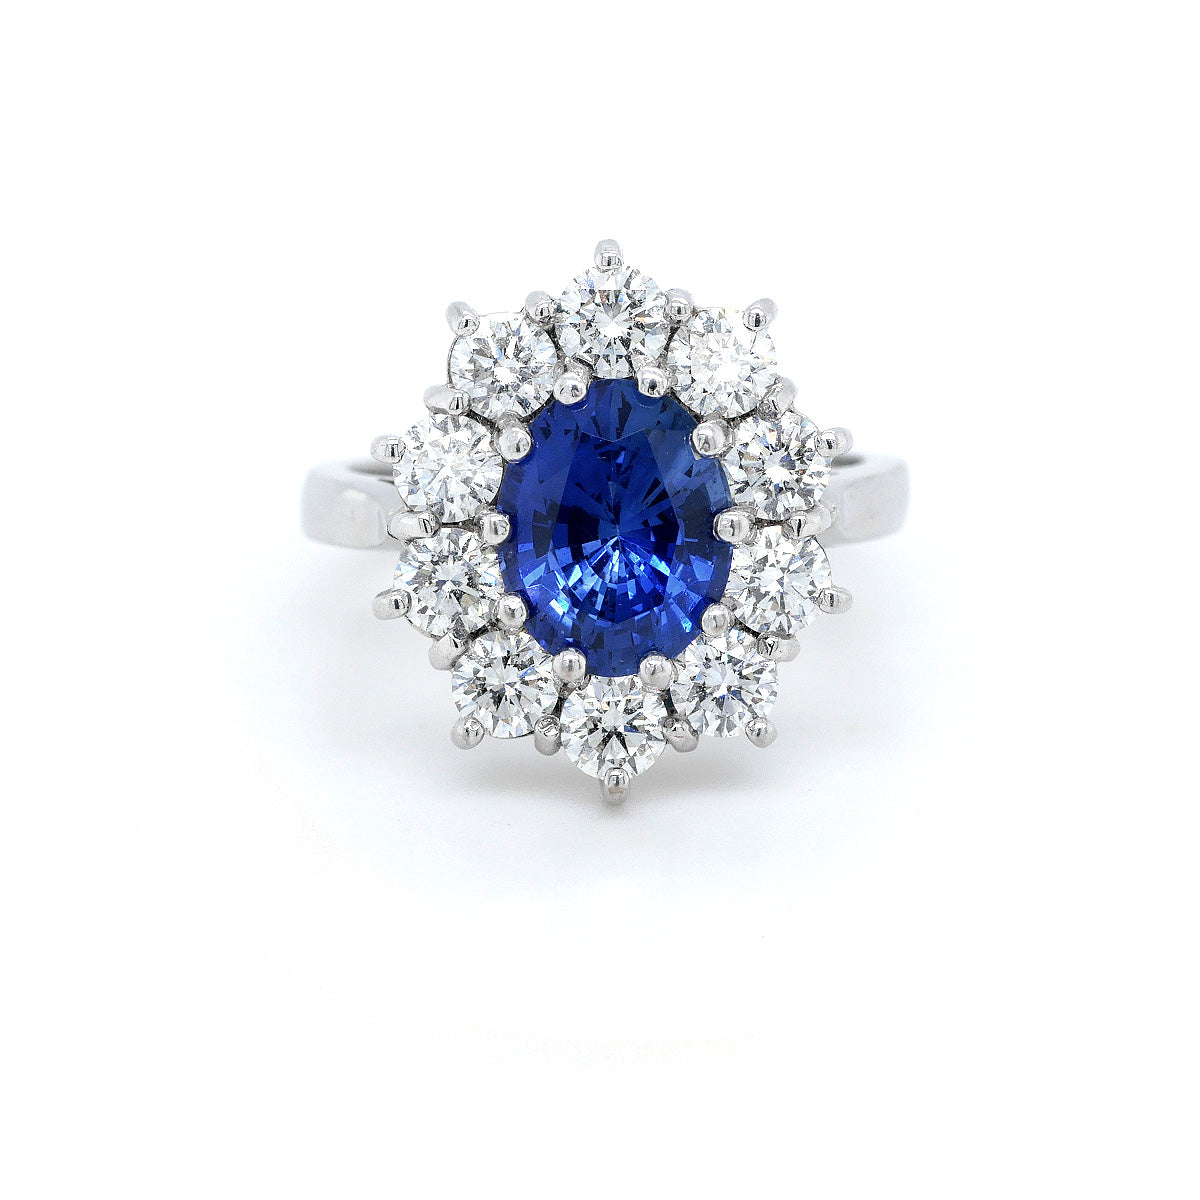 18ct White Gold 2.29ct Sapphire & 1.47 Diamond Cluster Ring